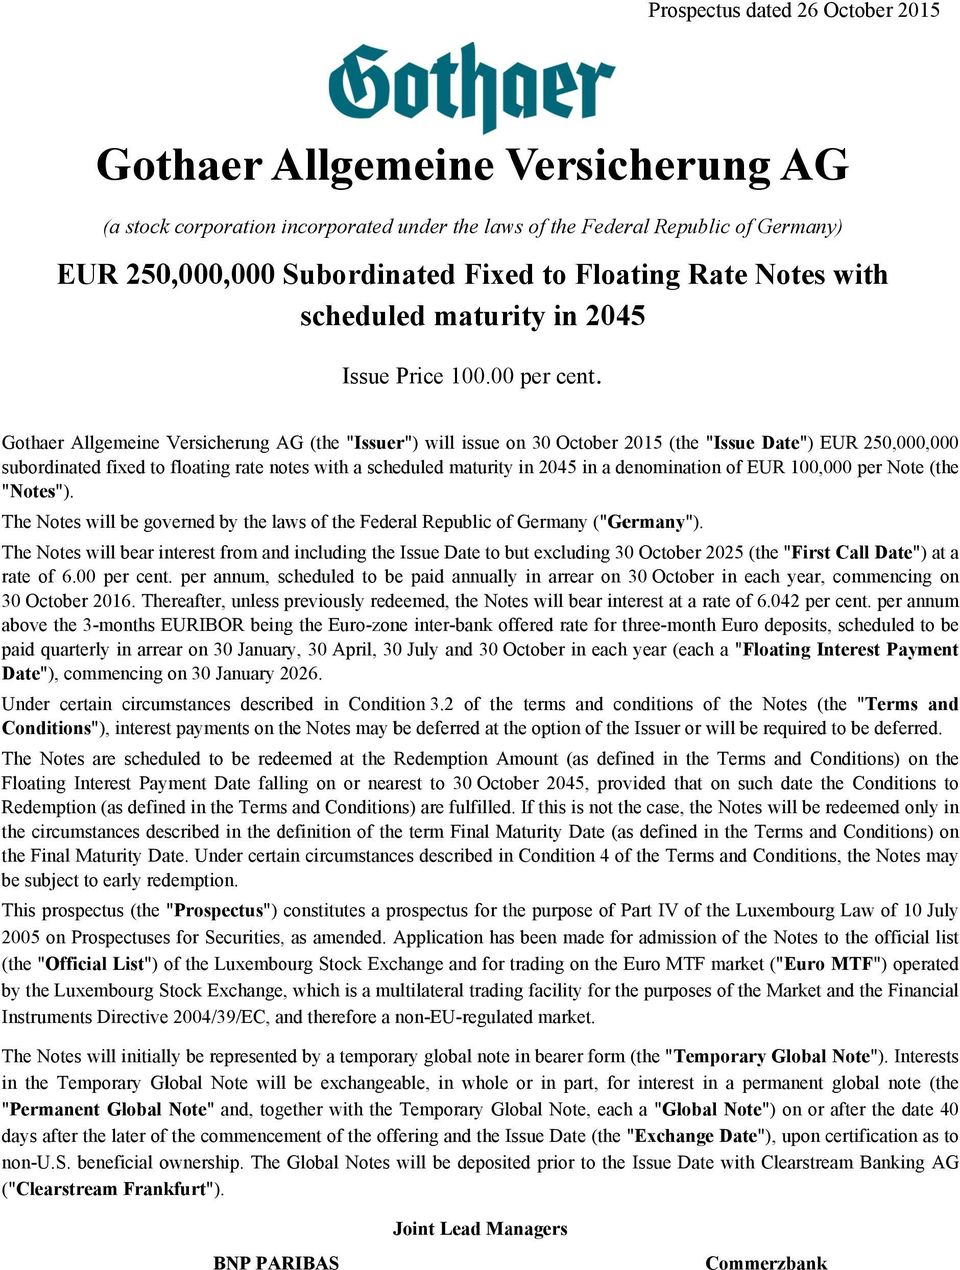 Gothaer Allgemeine Versicherung AG (the "Issuer Issuer") will issue on 30 October 2015 (the "Issue Date") EUR 250,000,000 subordinated fixed to floating rate notes with a scheduled maturity in 2045